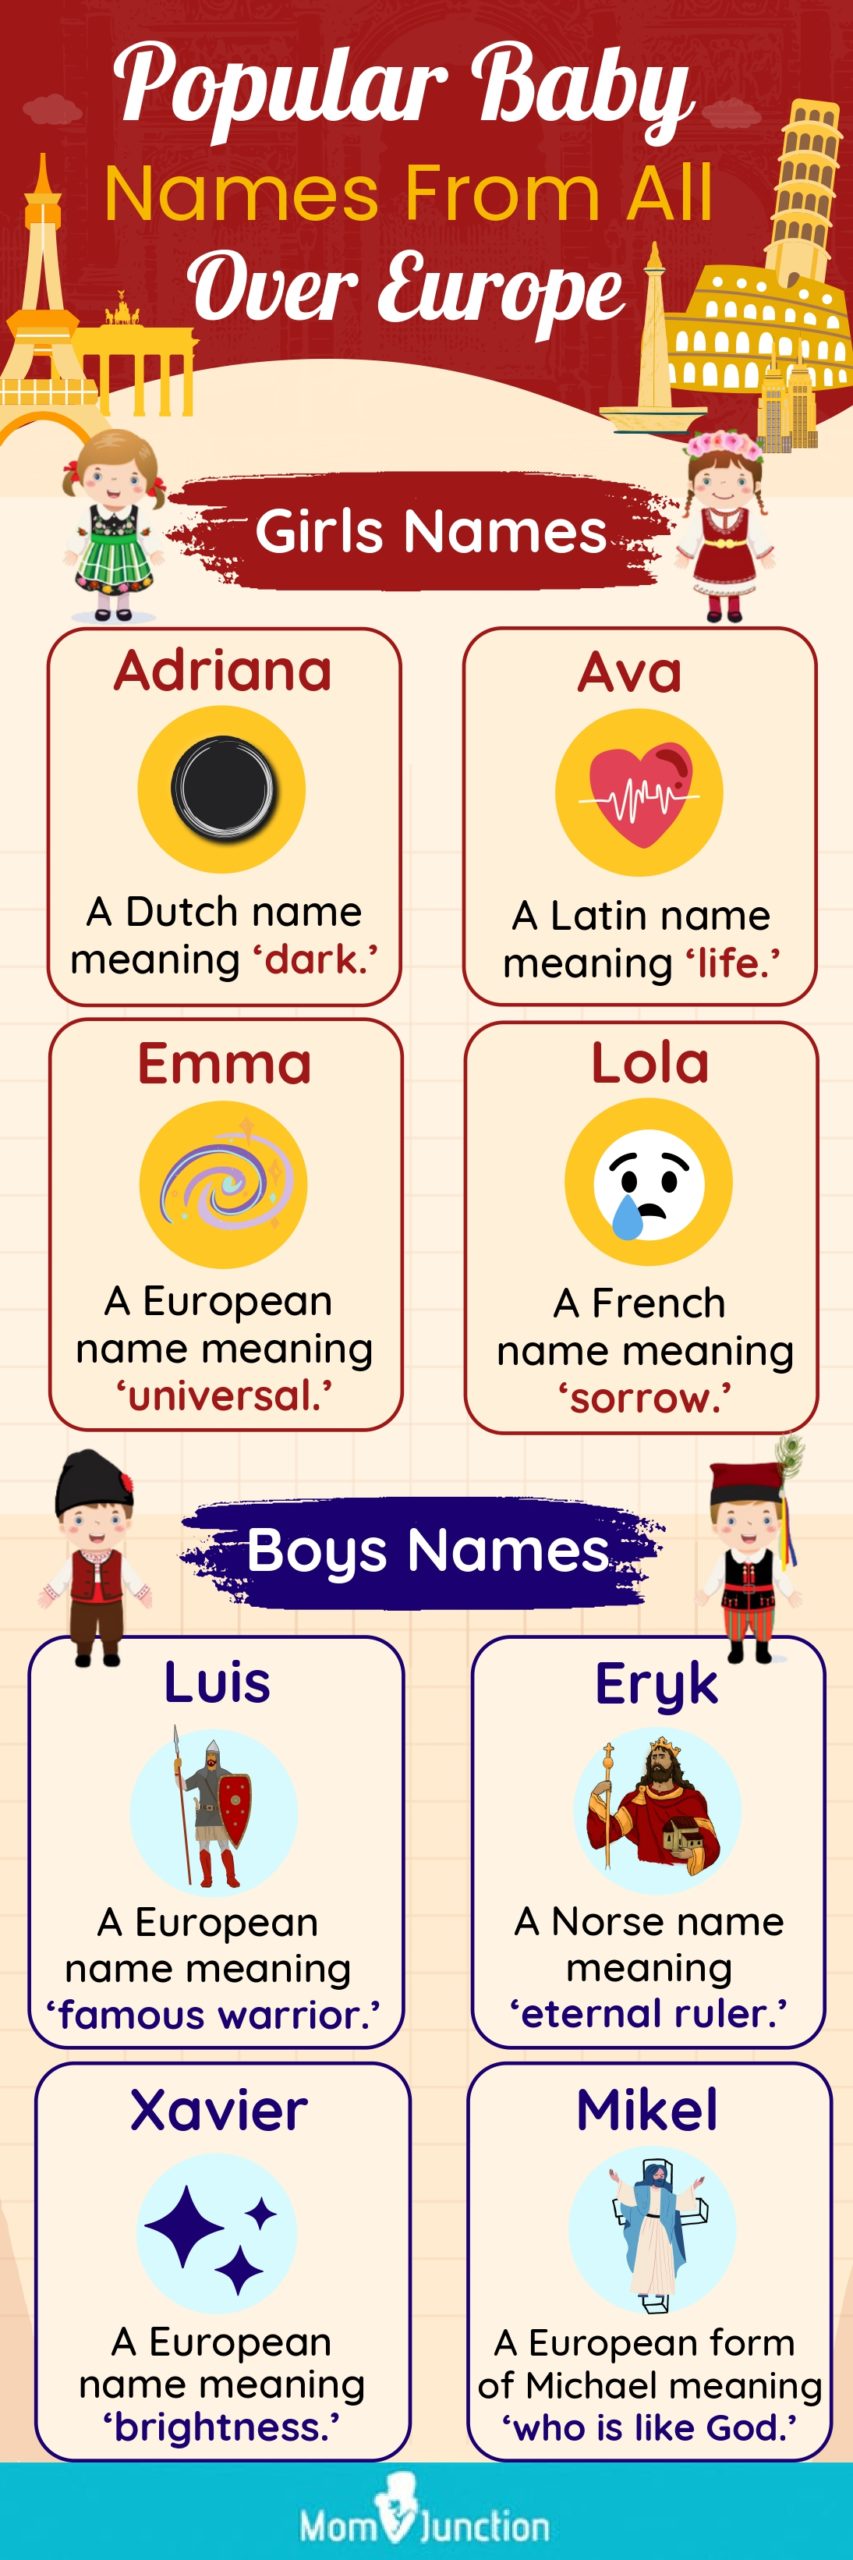 popular baby names from all over europe (infographic)